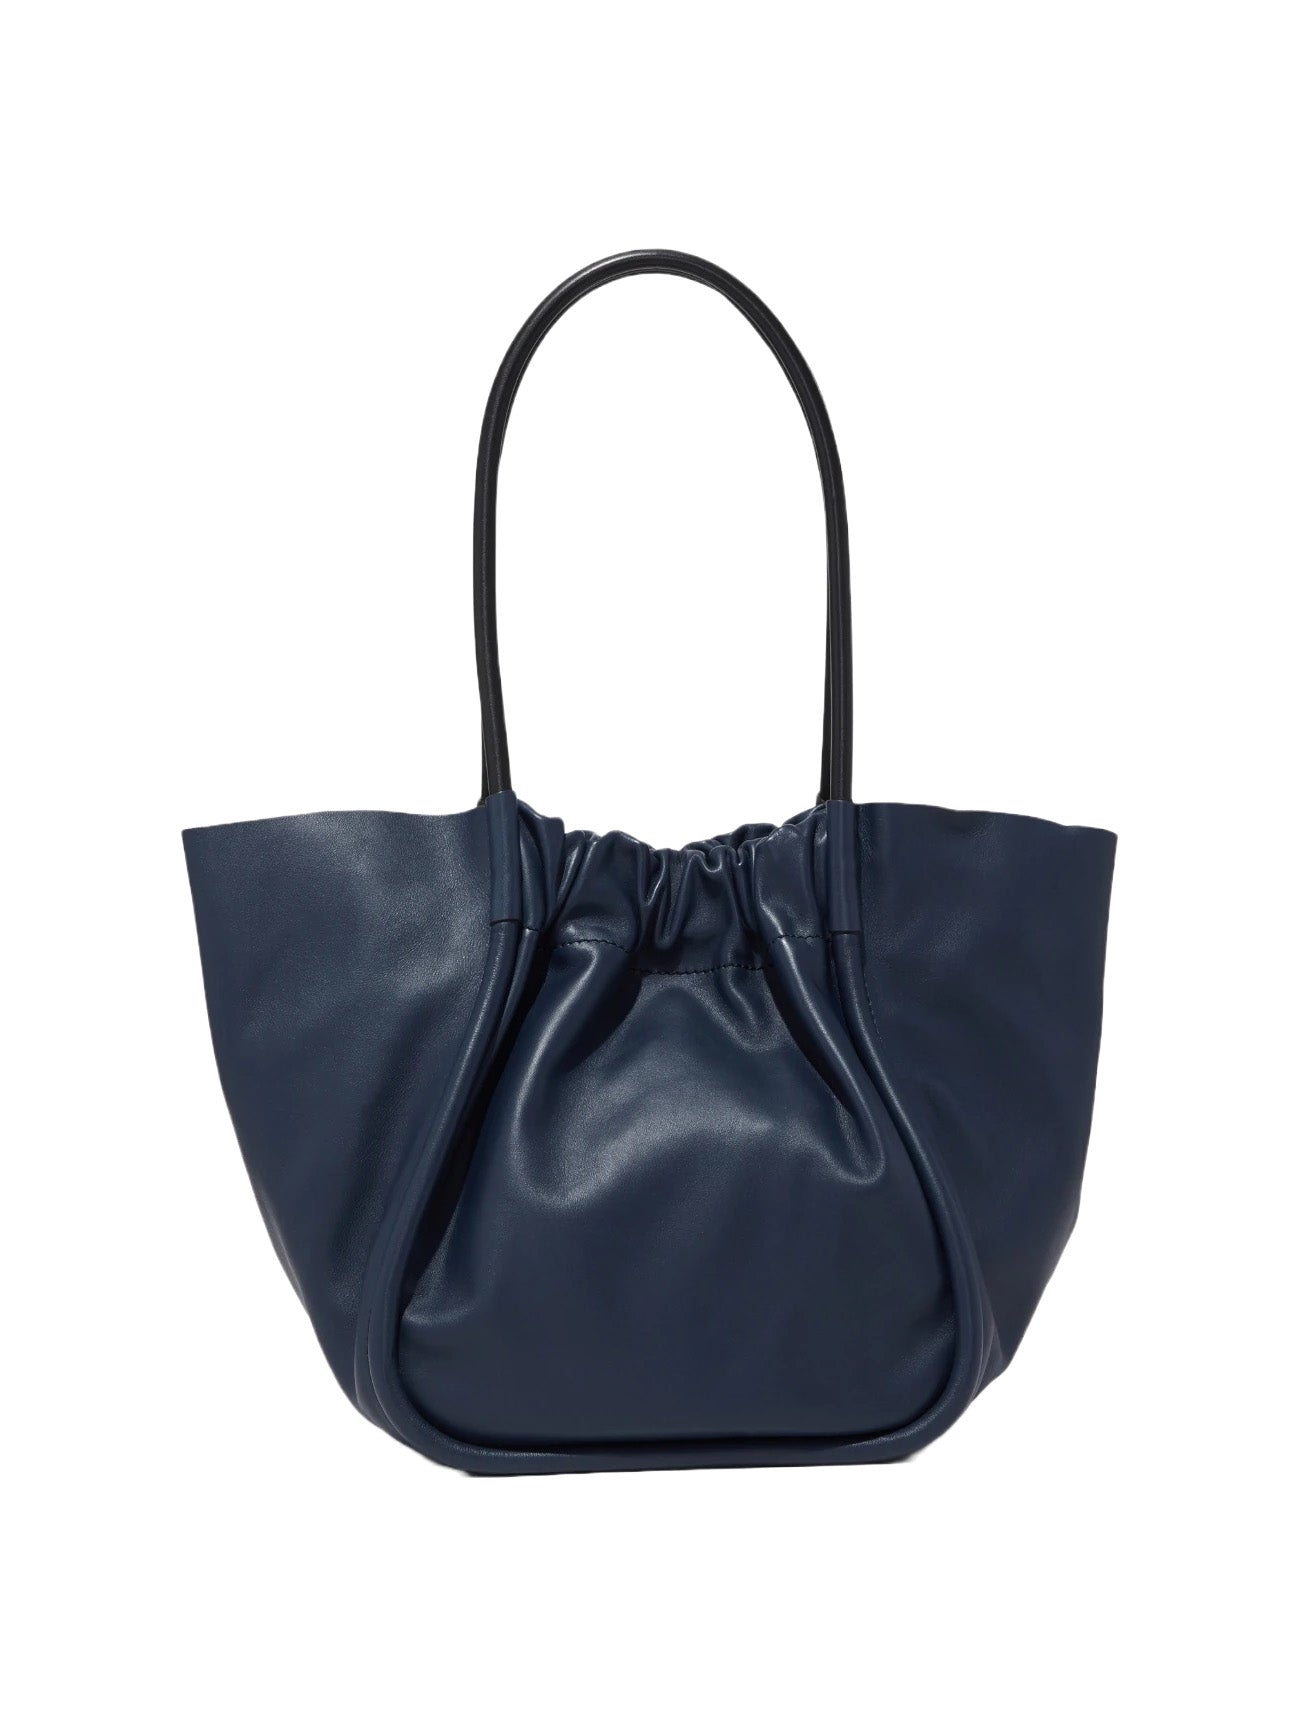 Large Ruched Tote in Dark Navy